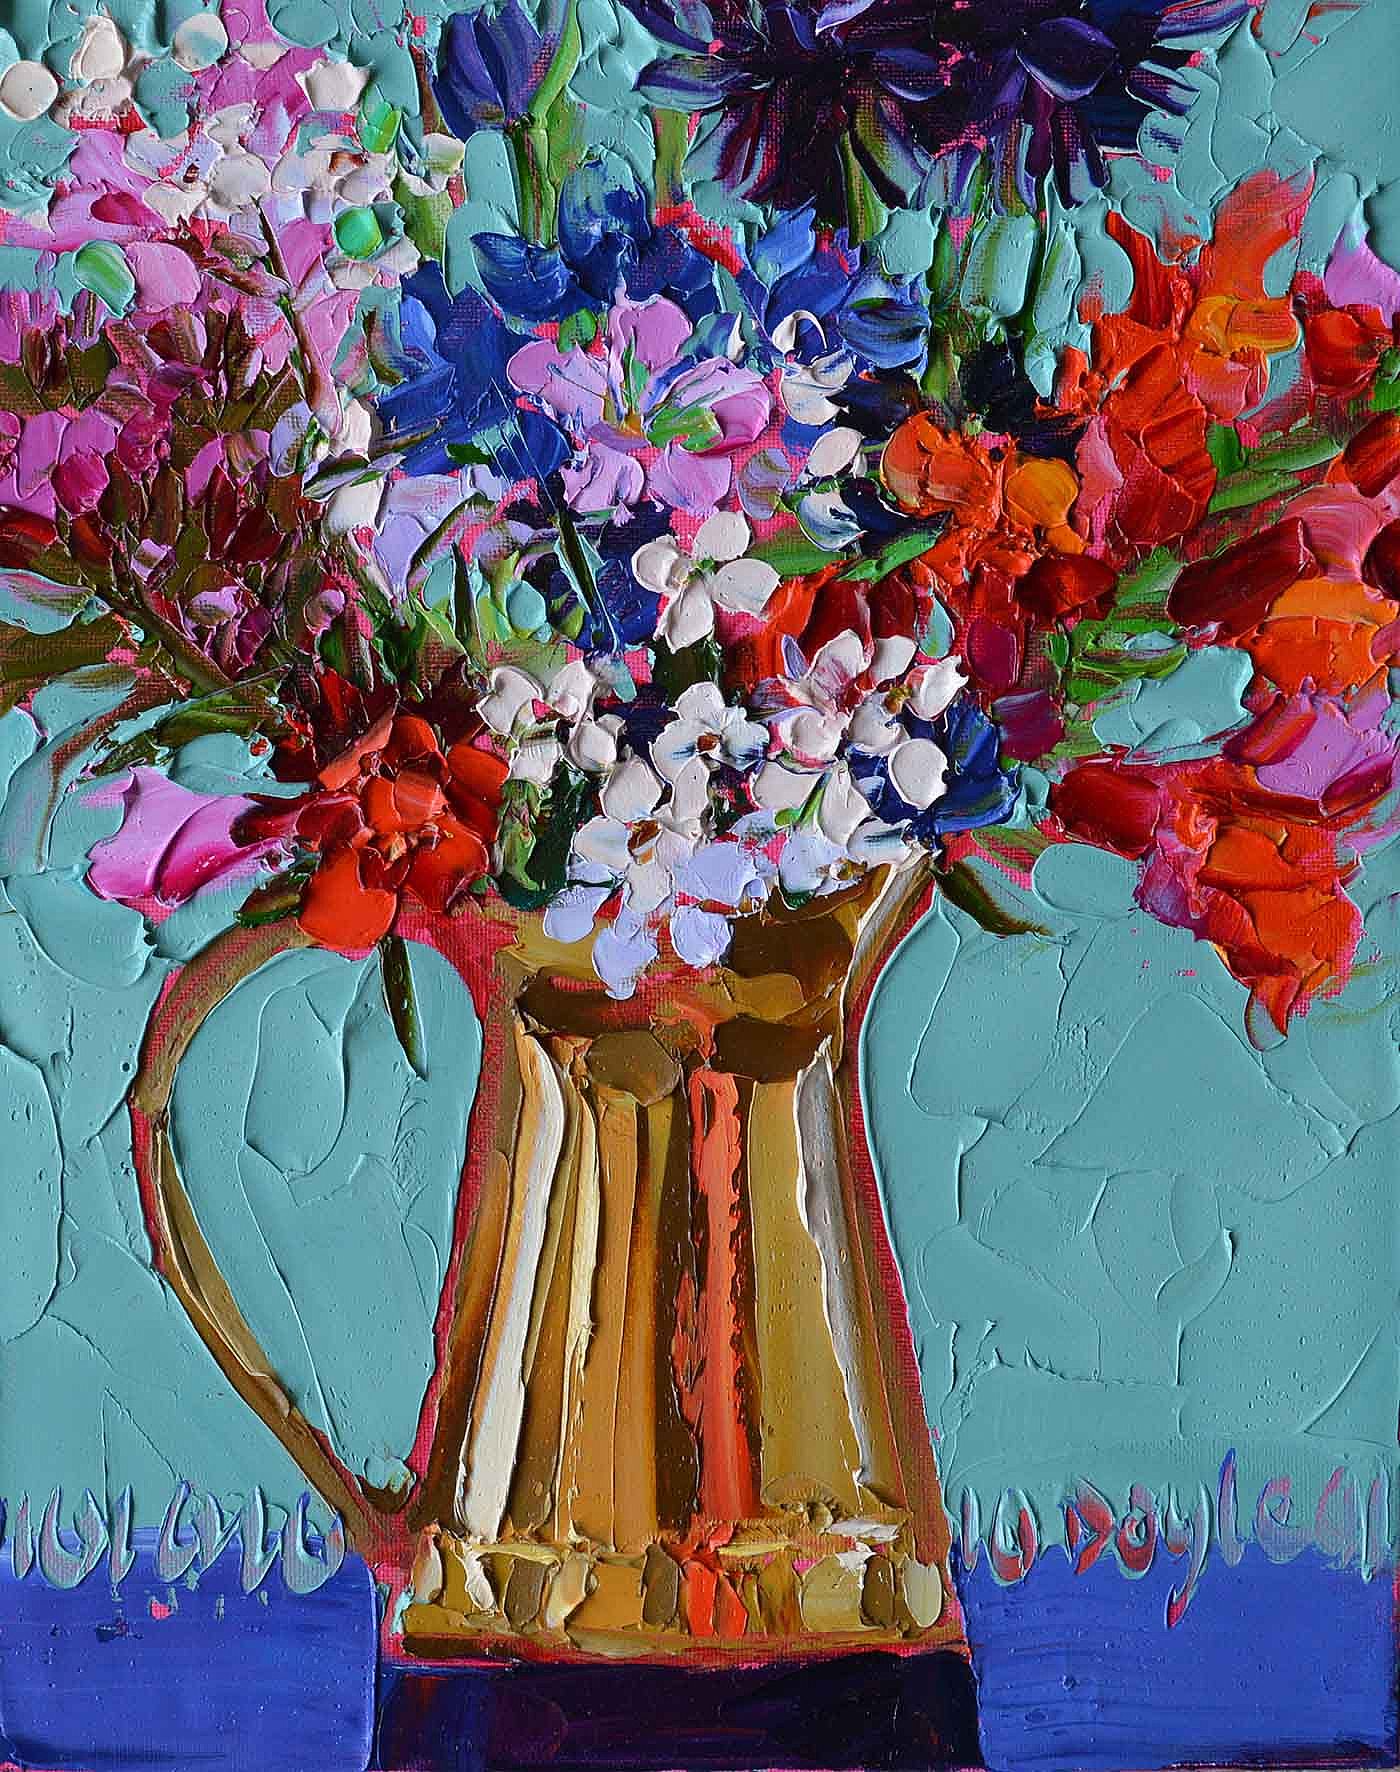 Pots and Posies 4 by Lucy Doyle